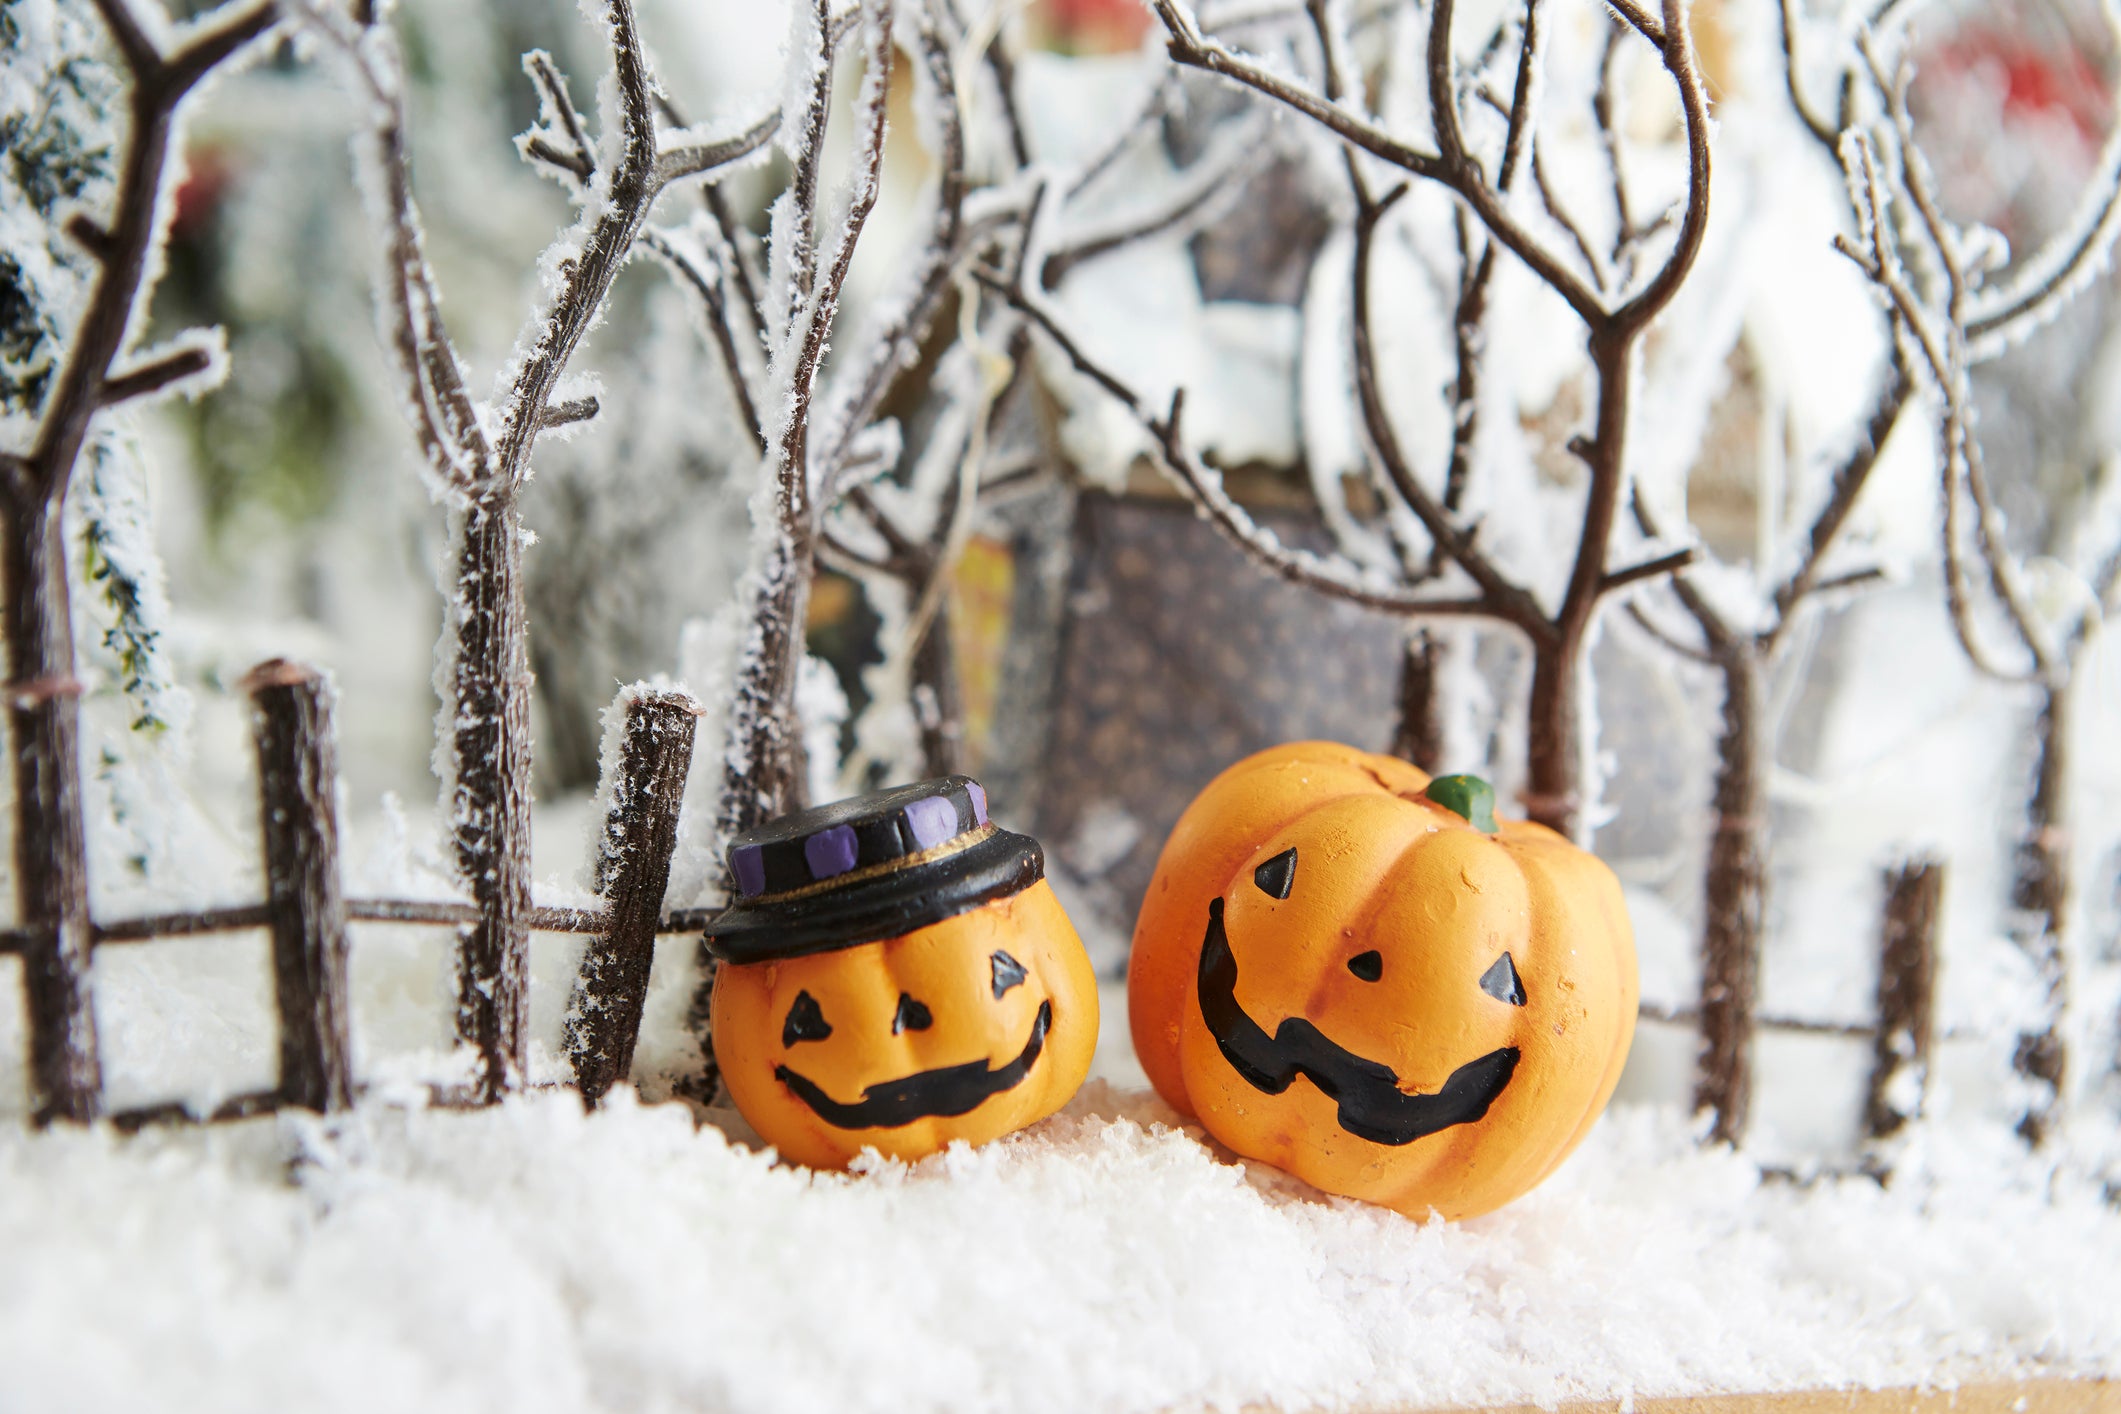 A pair of jack-o-lanterns sit in a pile of snow with snowy trees in the background